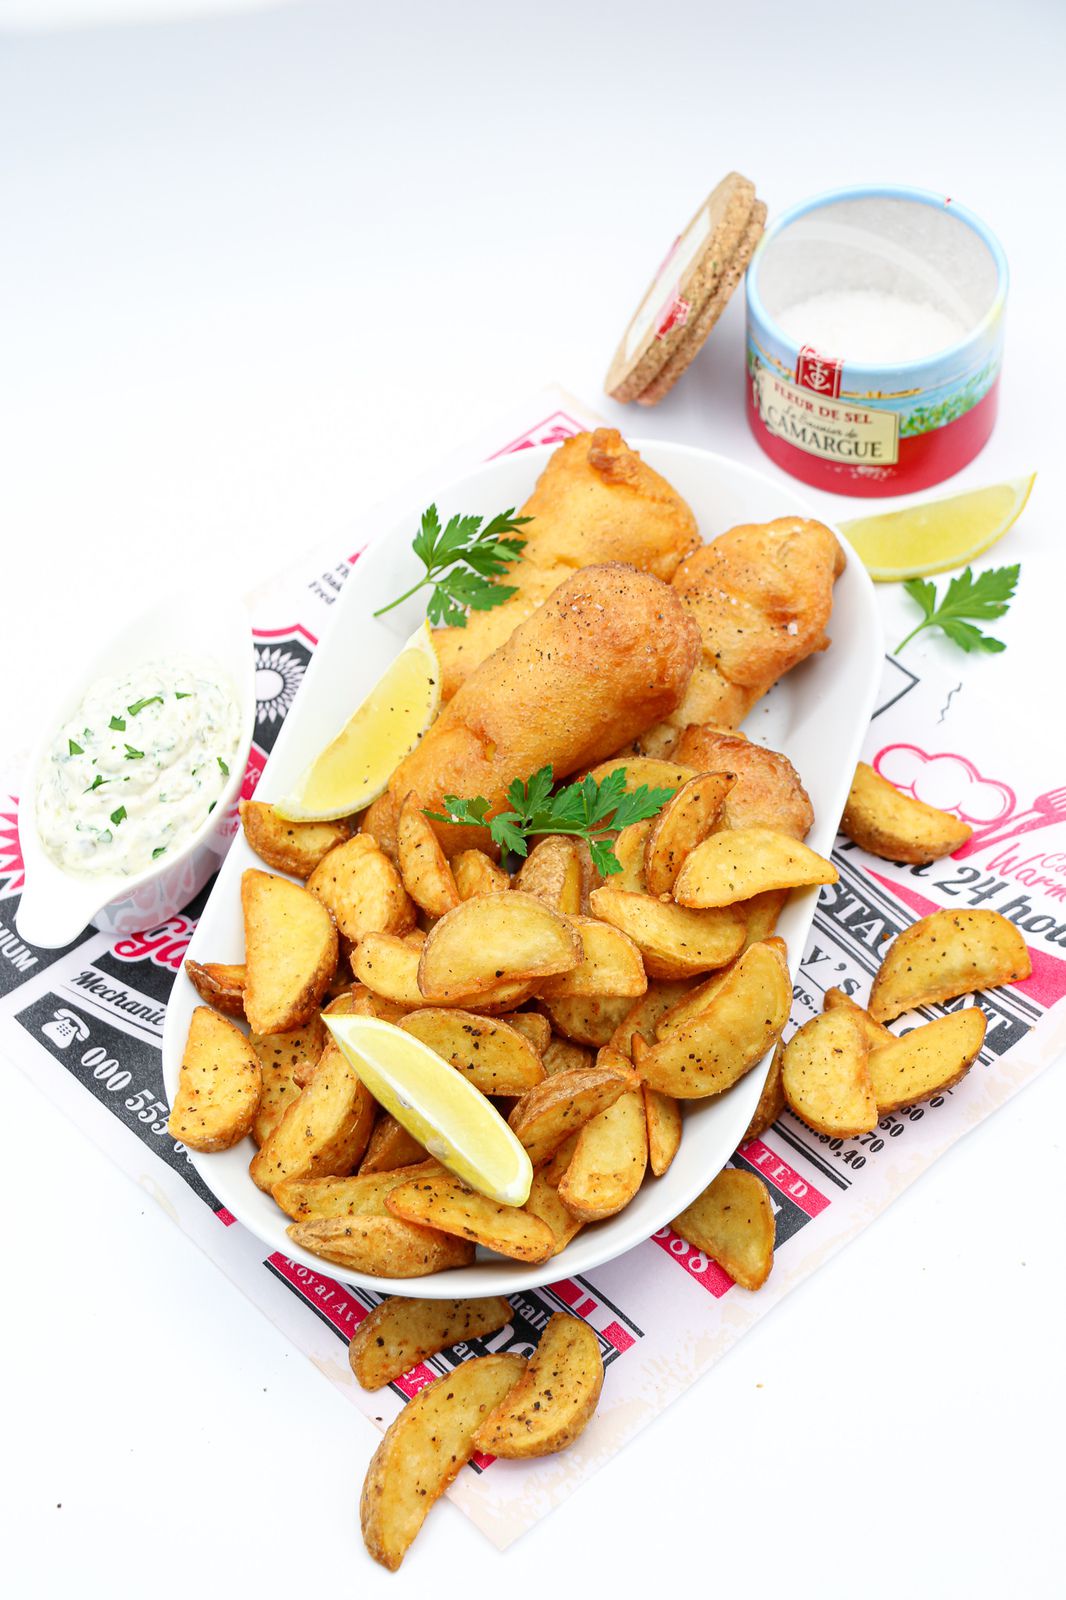 Fish and chips authentique